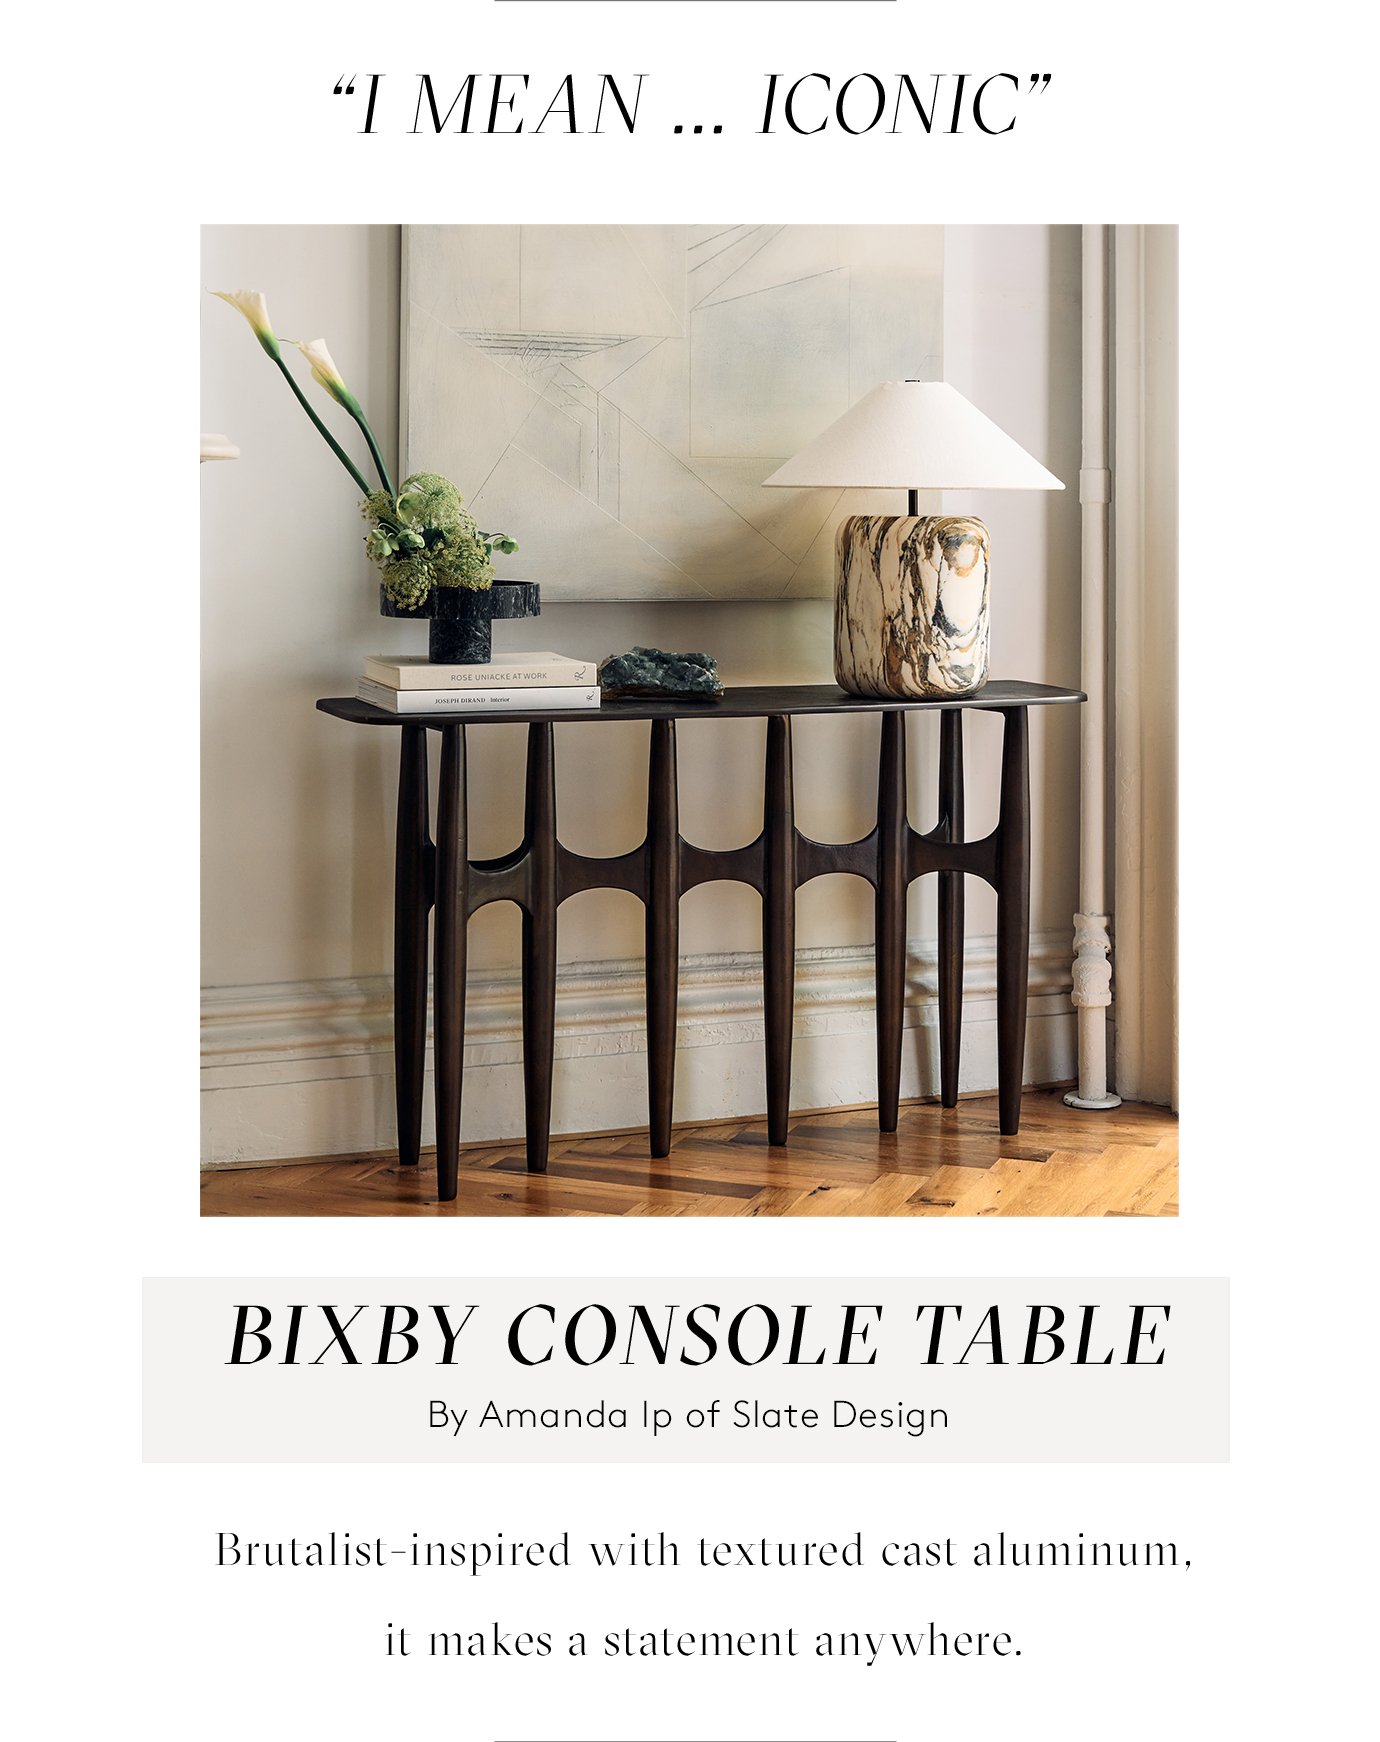 BIXBY CONSOLE TABLE